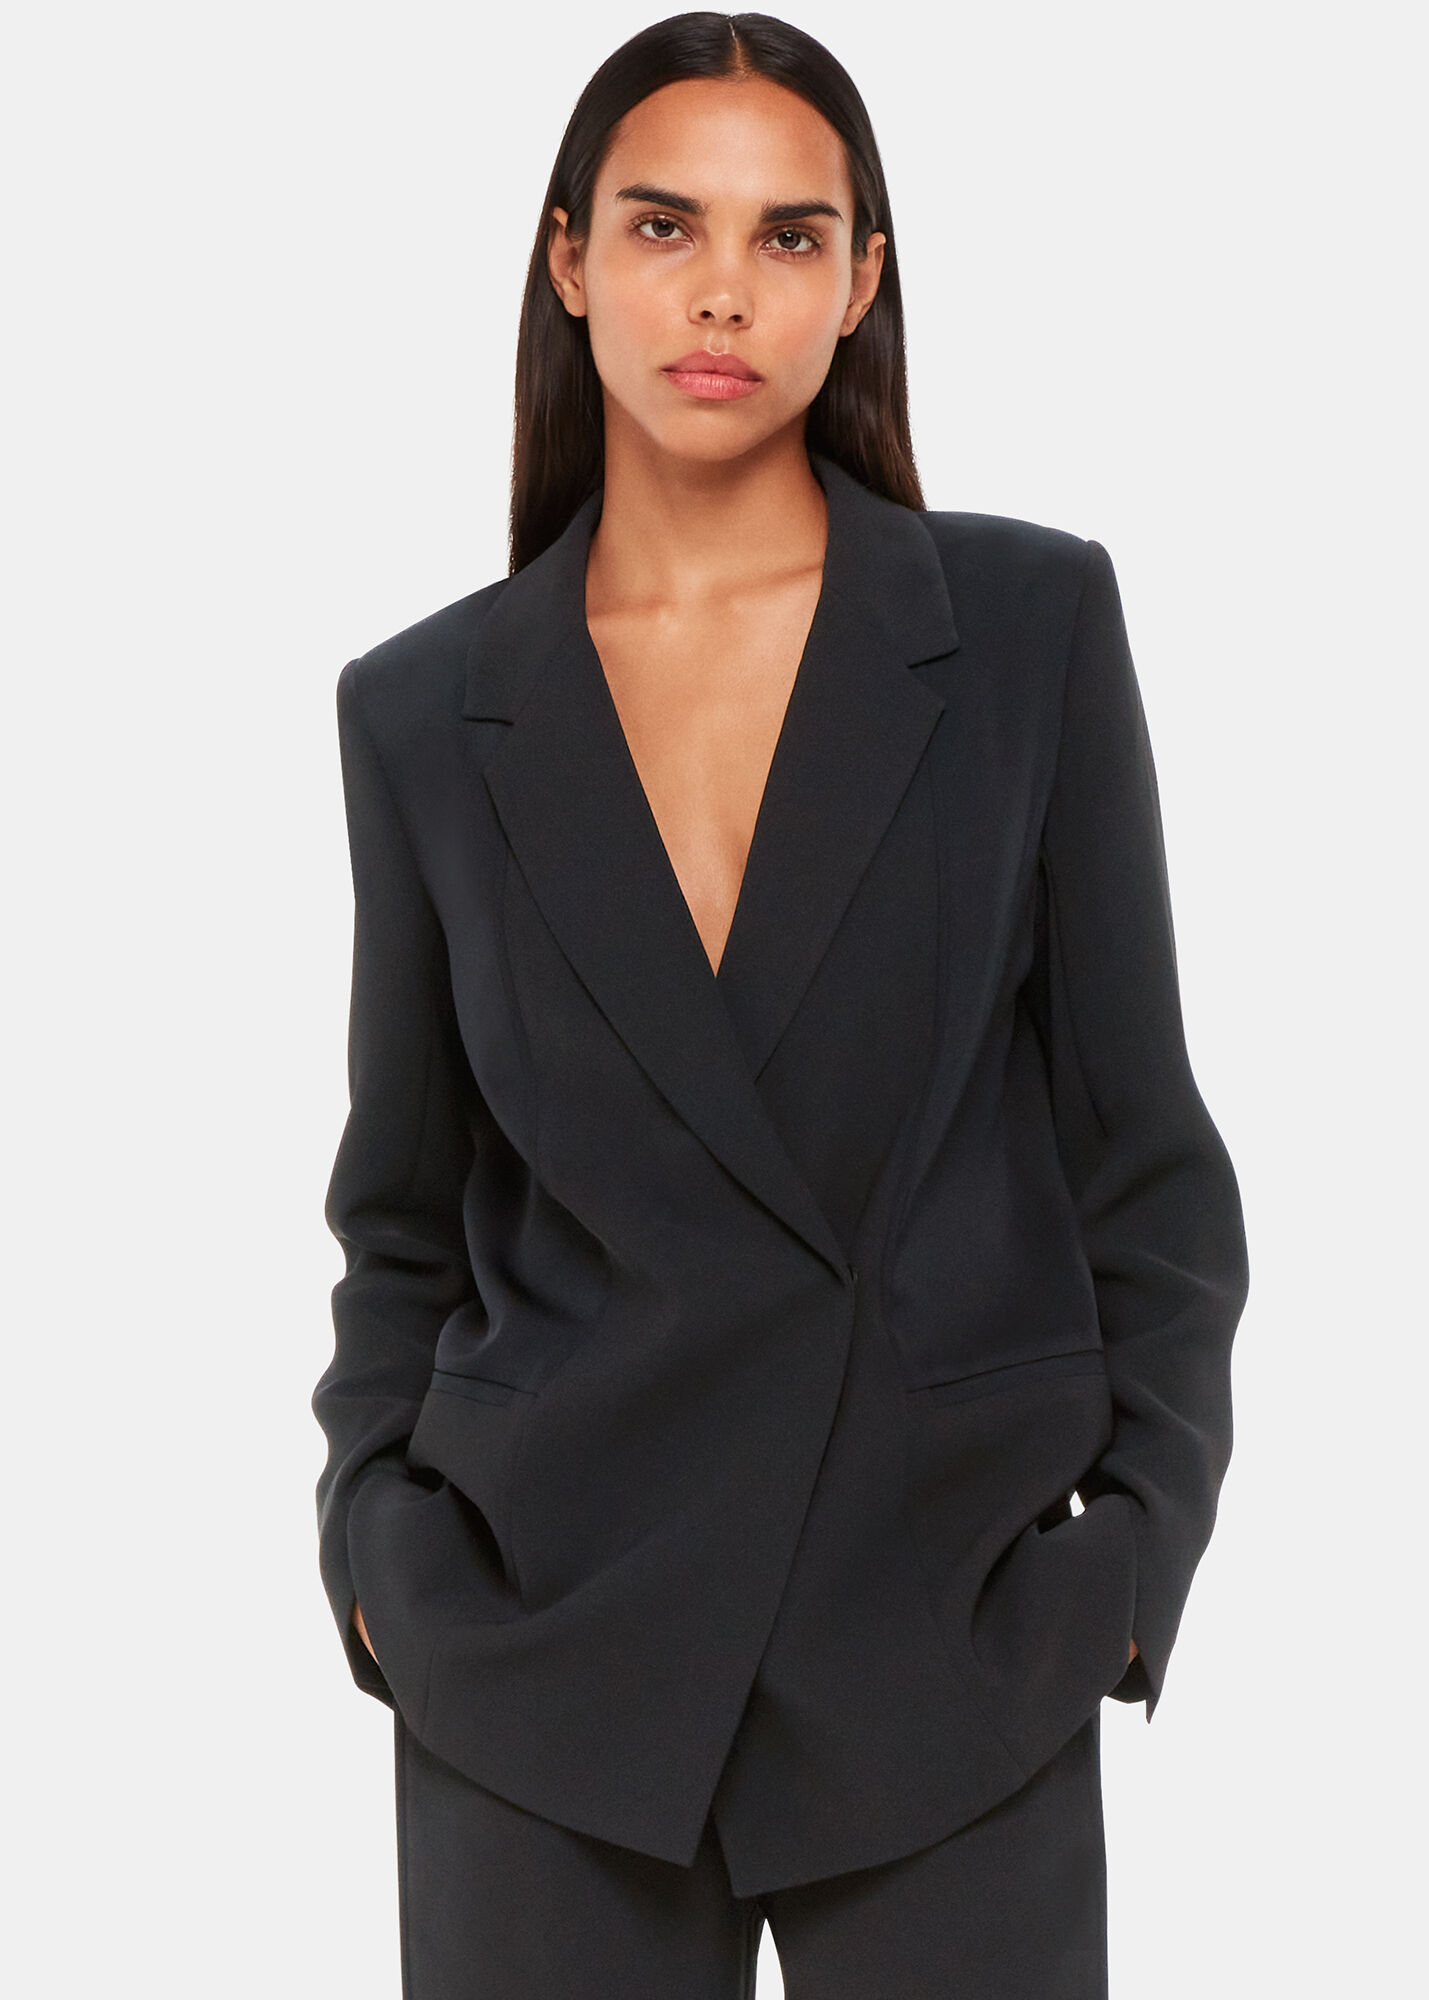 Black Tailored Blazer with Button Front | Whistles | Whistles UK